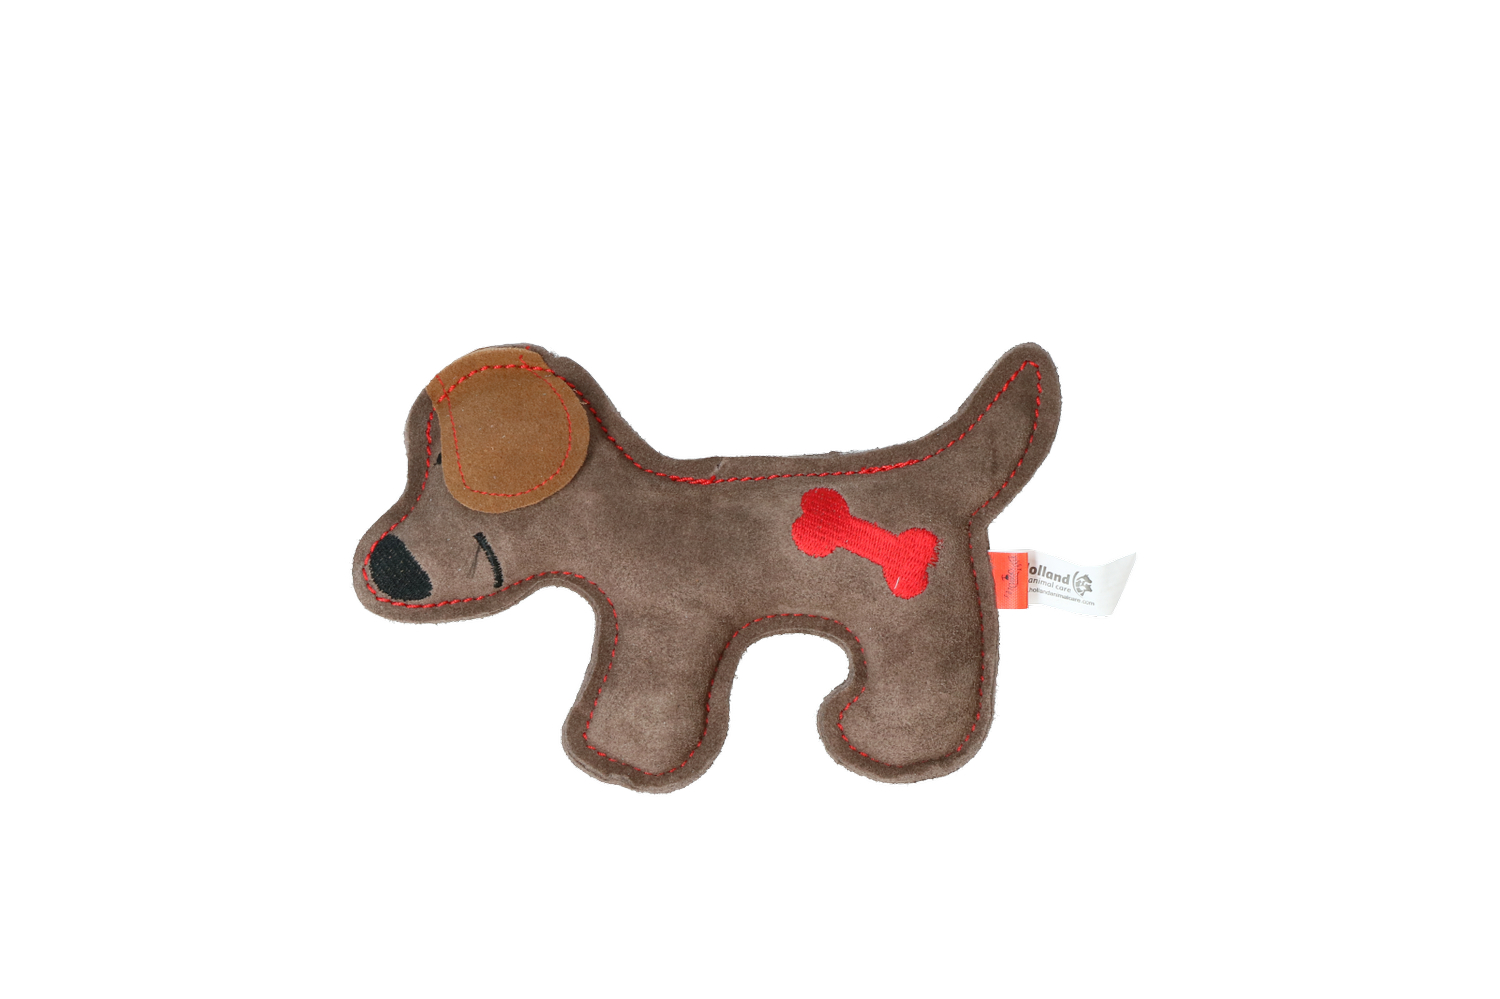 Doggy-Doodles-Hundespielzeug-Puppy-Braun-Rot